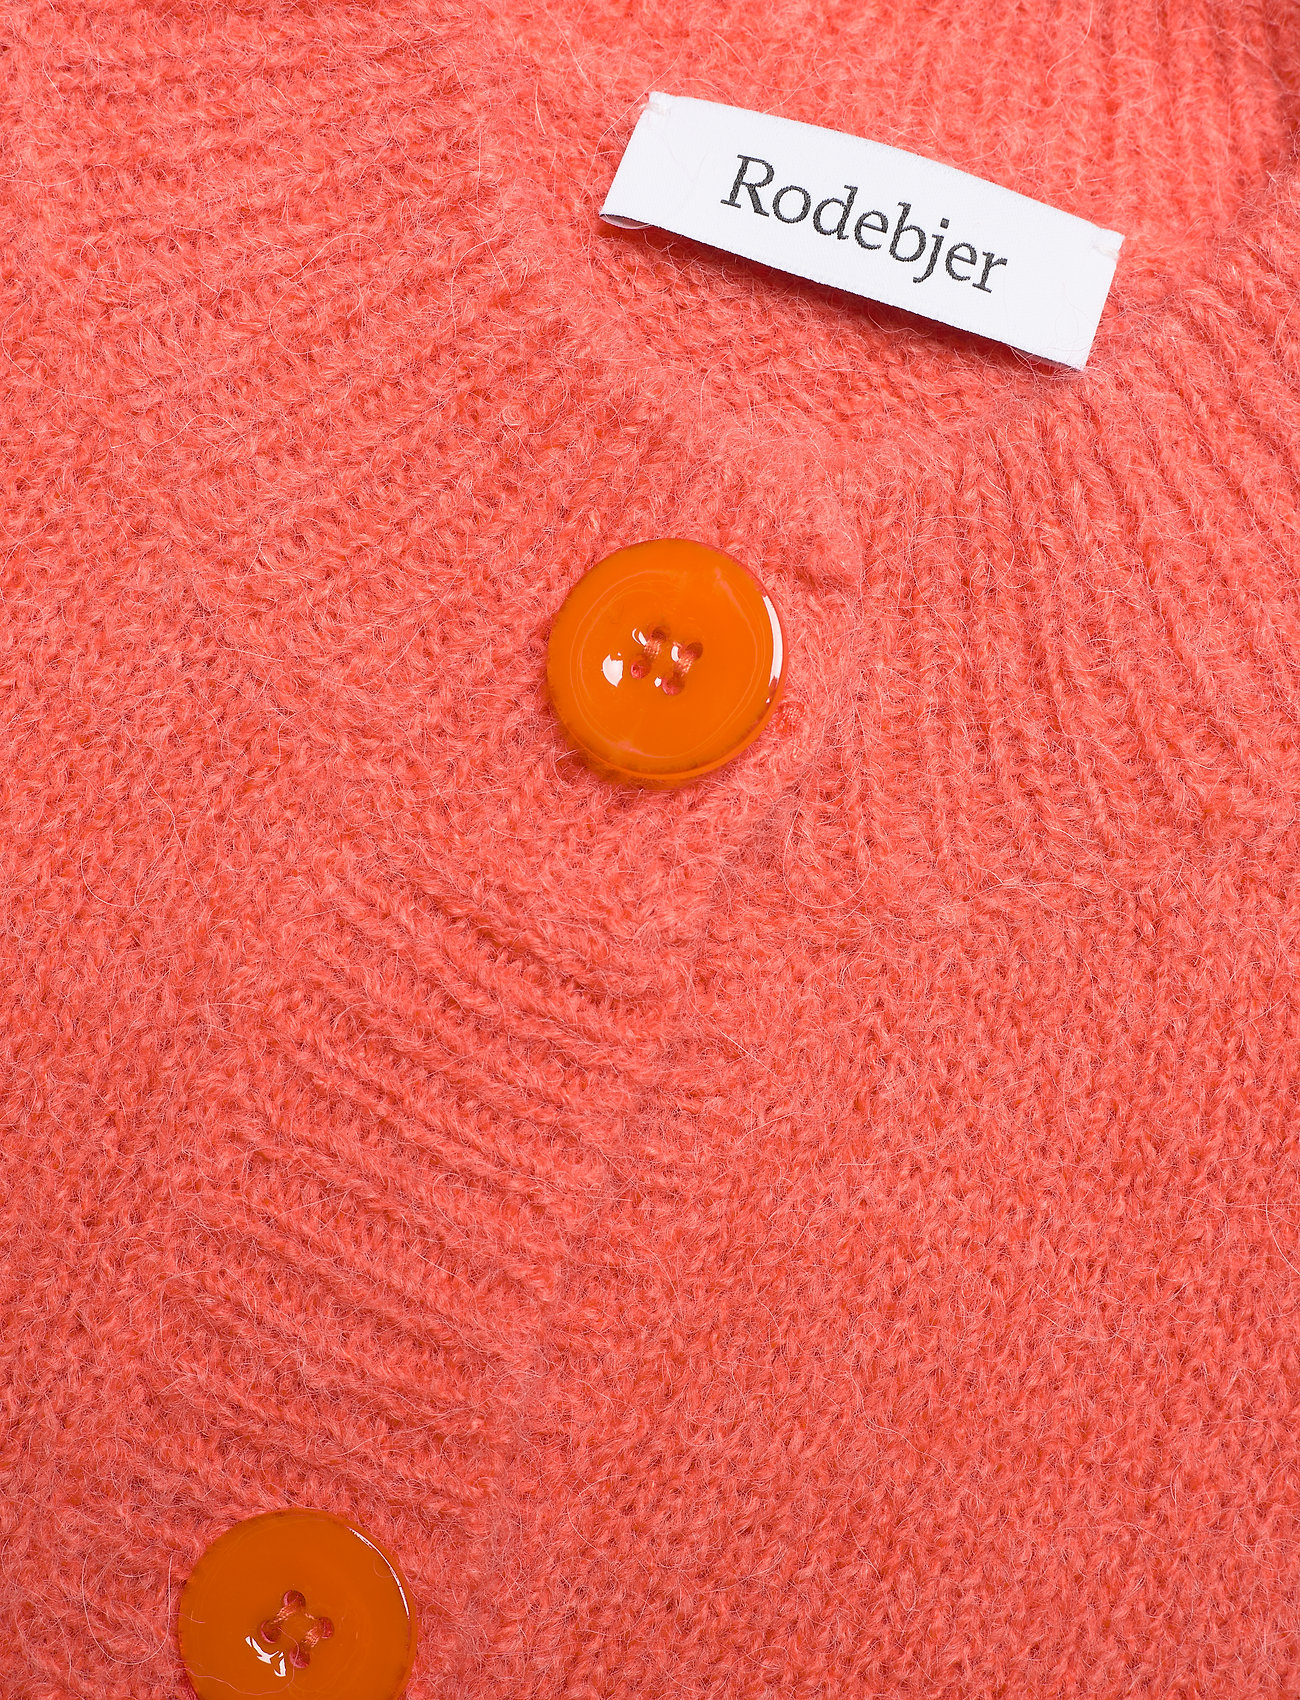 RODEBJER - RODEBJER ALDONZA - cardigans - coral crush - 2